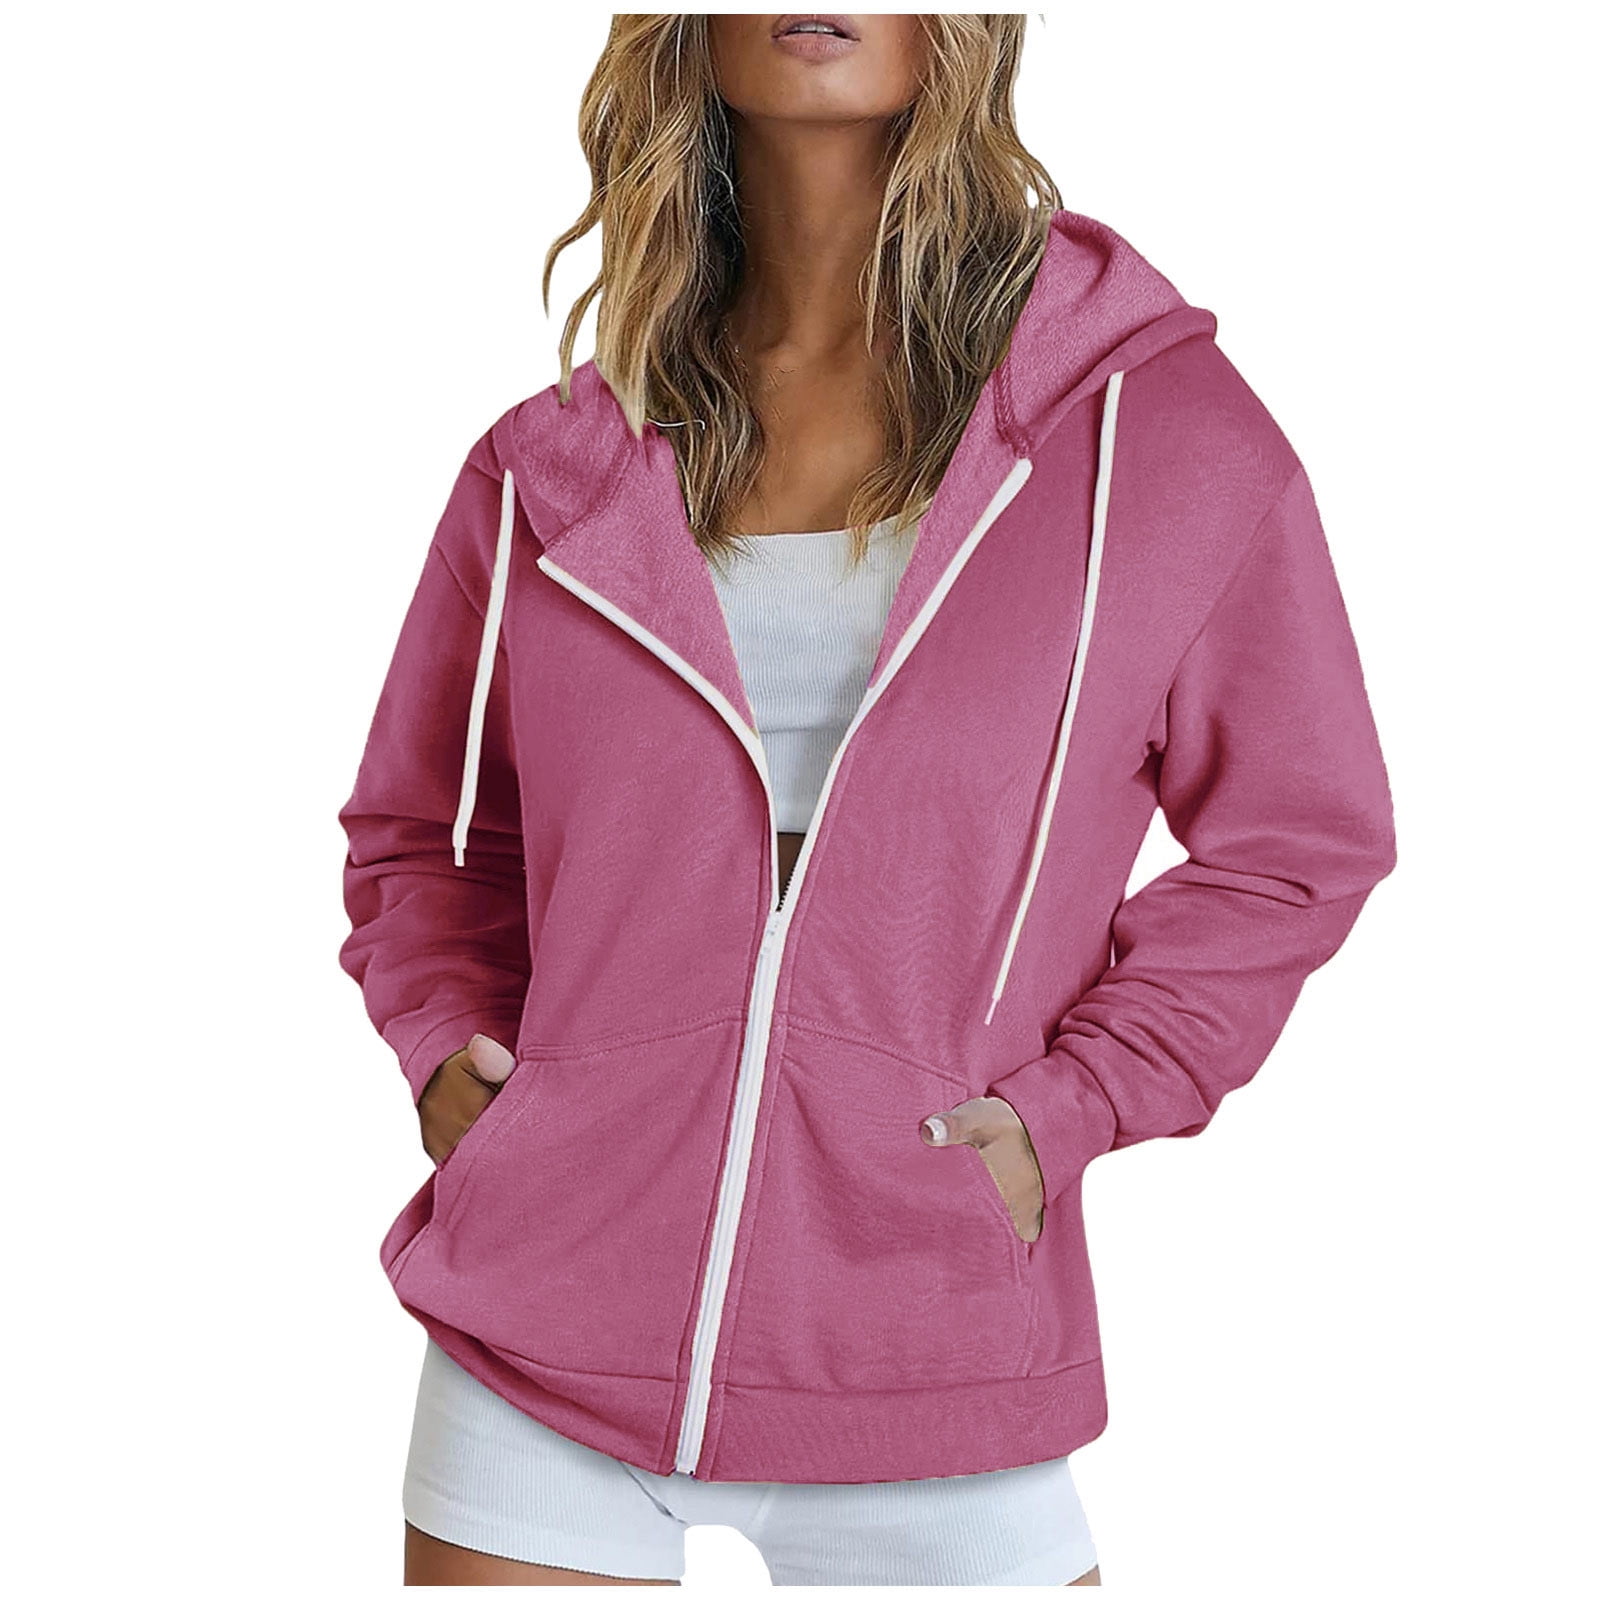 Full Zip-up Jackets with Pockets for Women Cotton Fleece Plain Hoodie  Outwear Drawstring Hooded Sweatshirt Coat (Small, Hot Pink 01) 